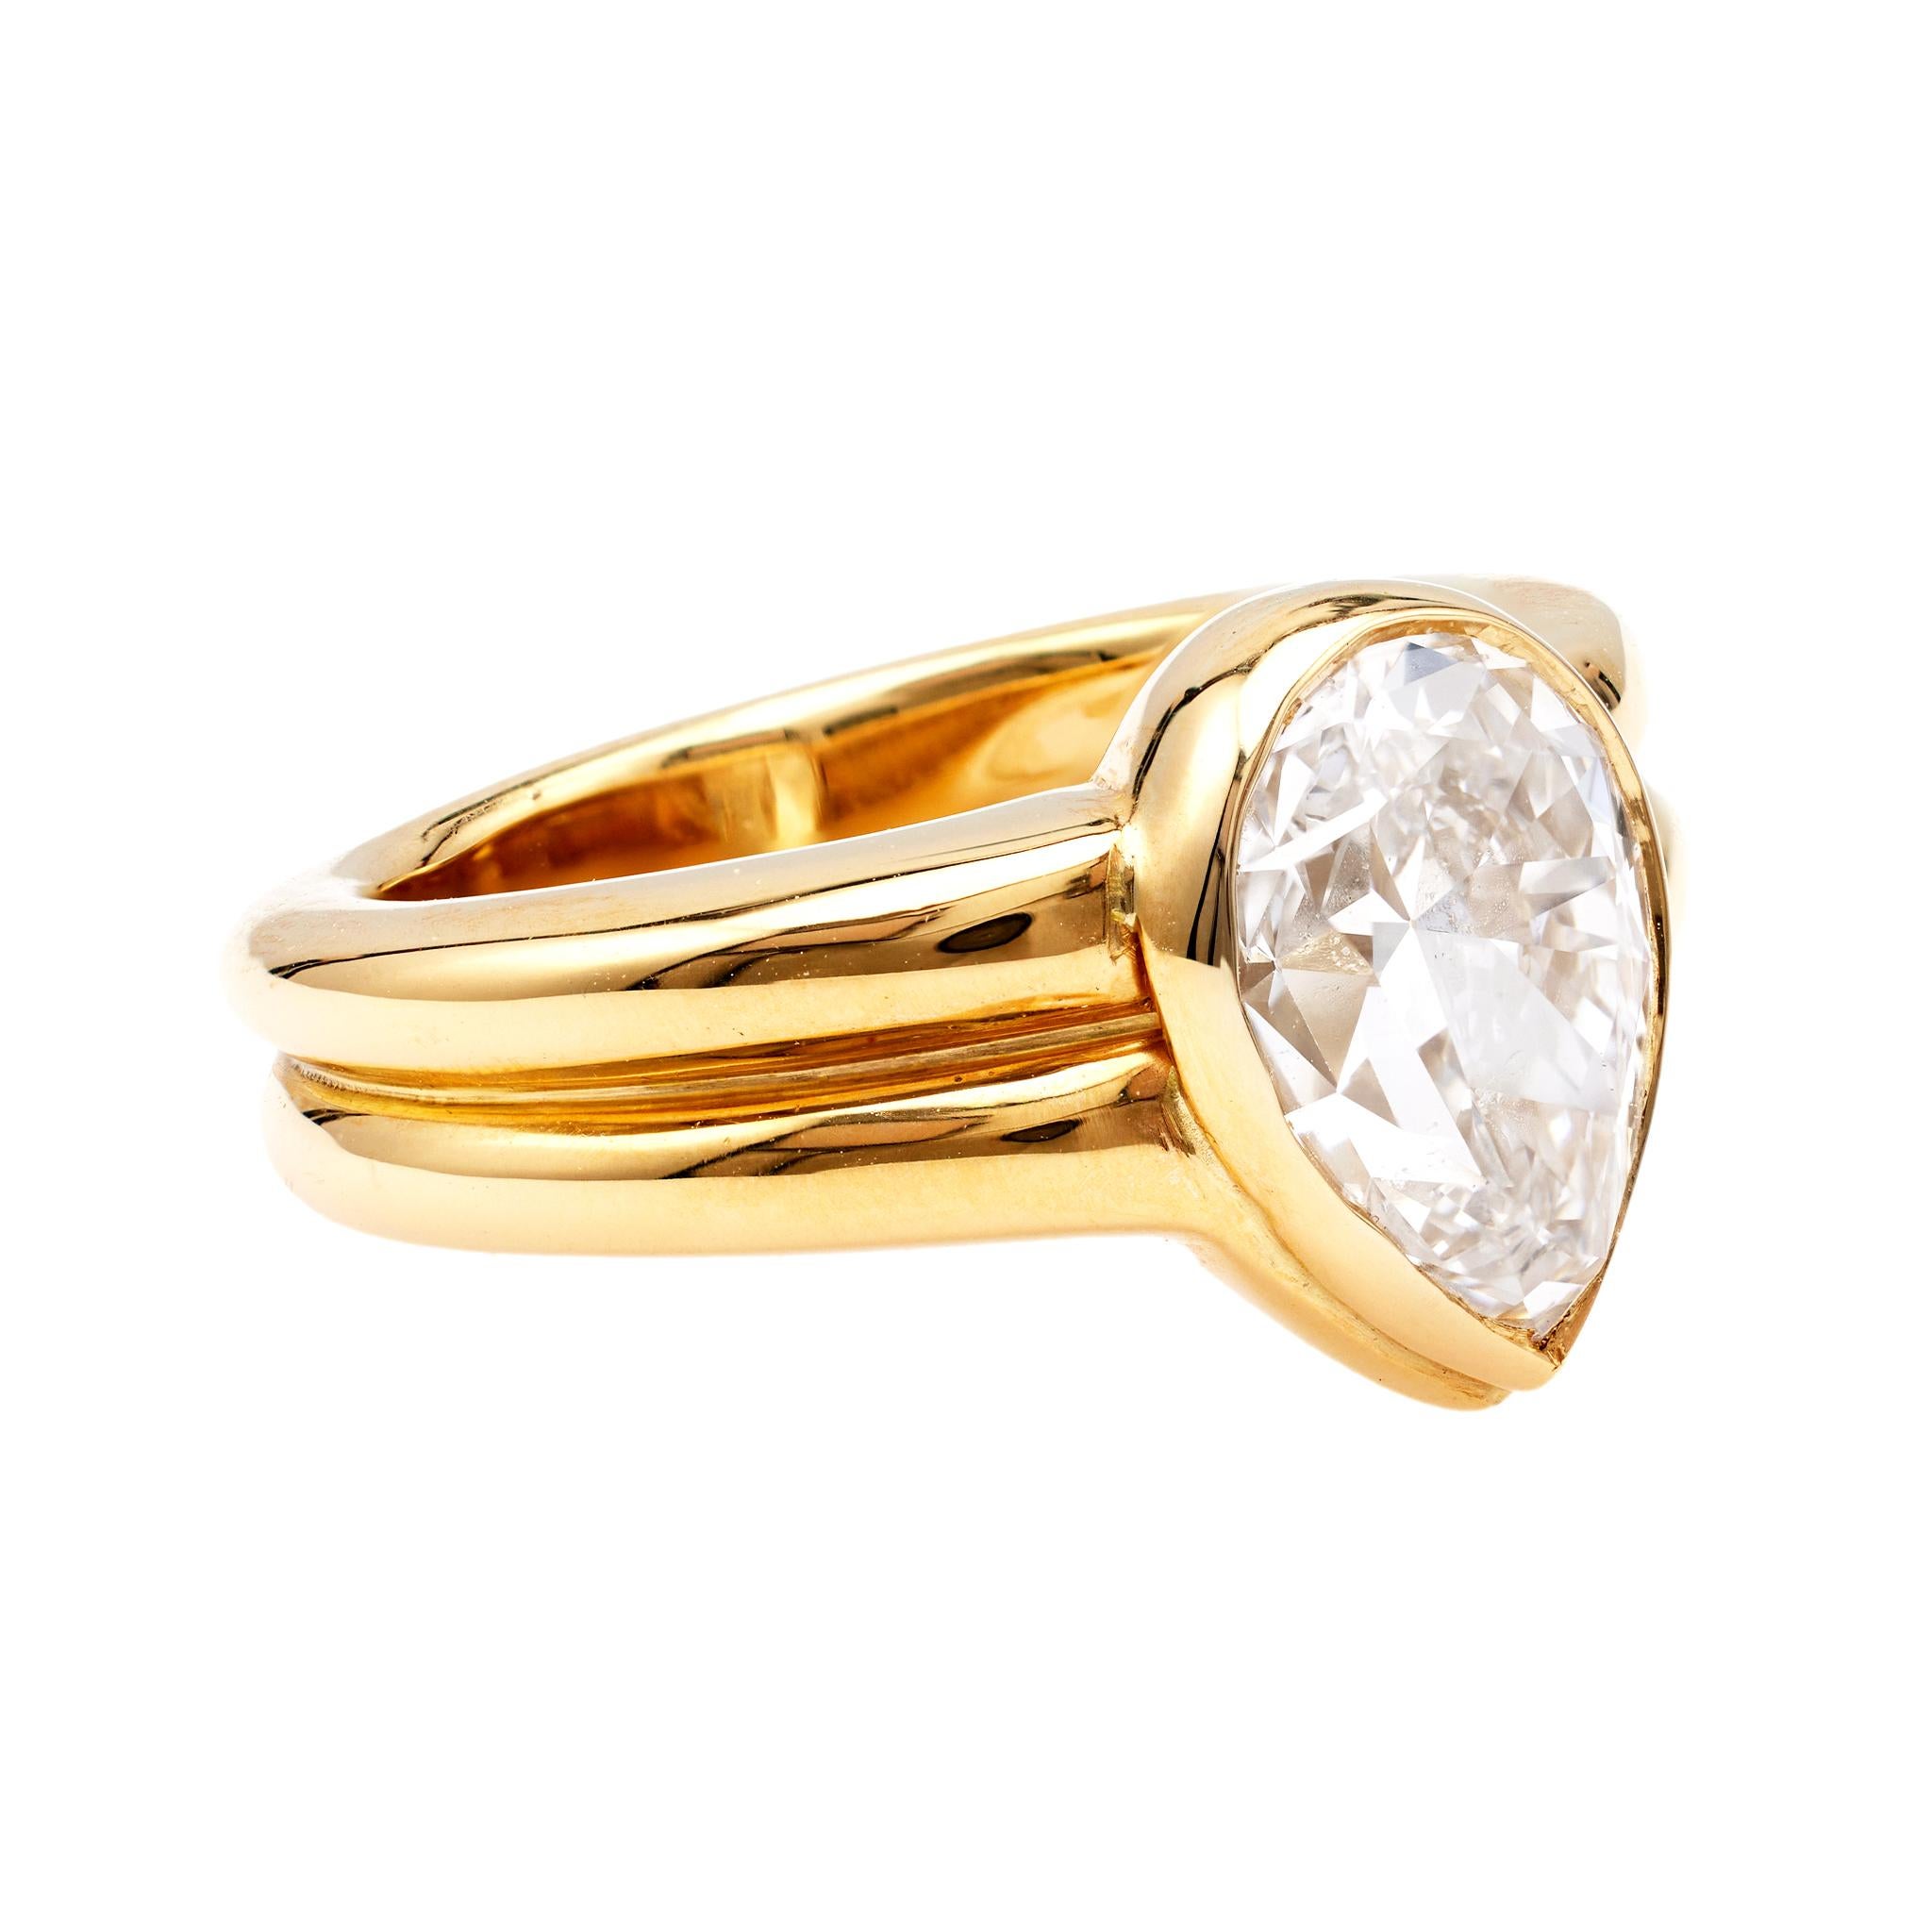 Vintage French GIA 2.85 Carat Pear Cut Diamond 18k Yellow Gold Ring For Sale 1